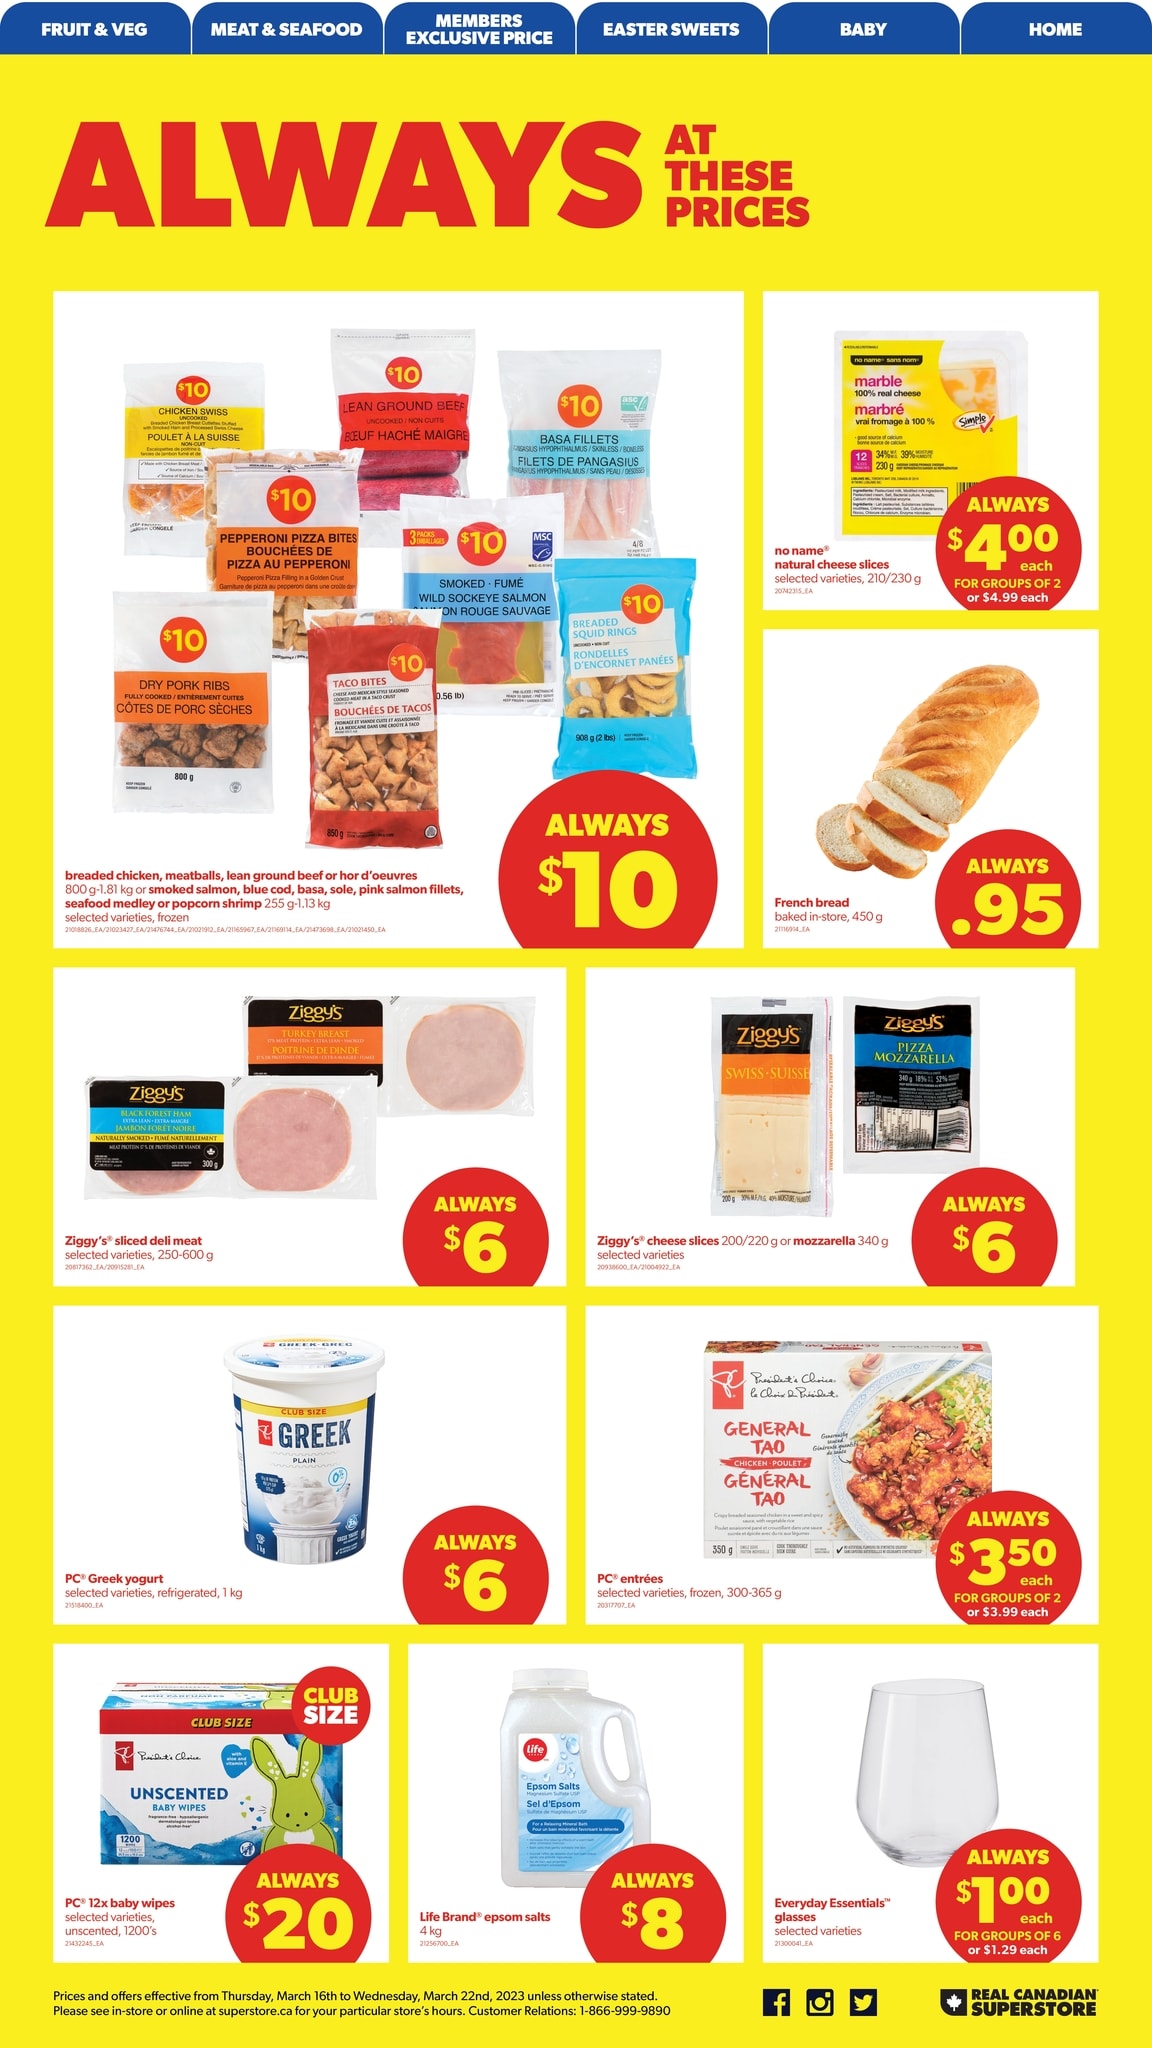 Real Canadian Superstore - Western Canada - Weekly Flyer Specials - Page 7